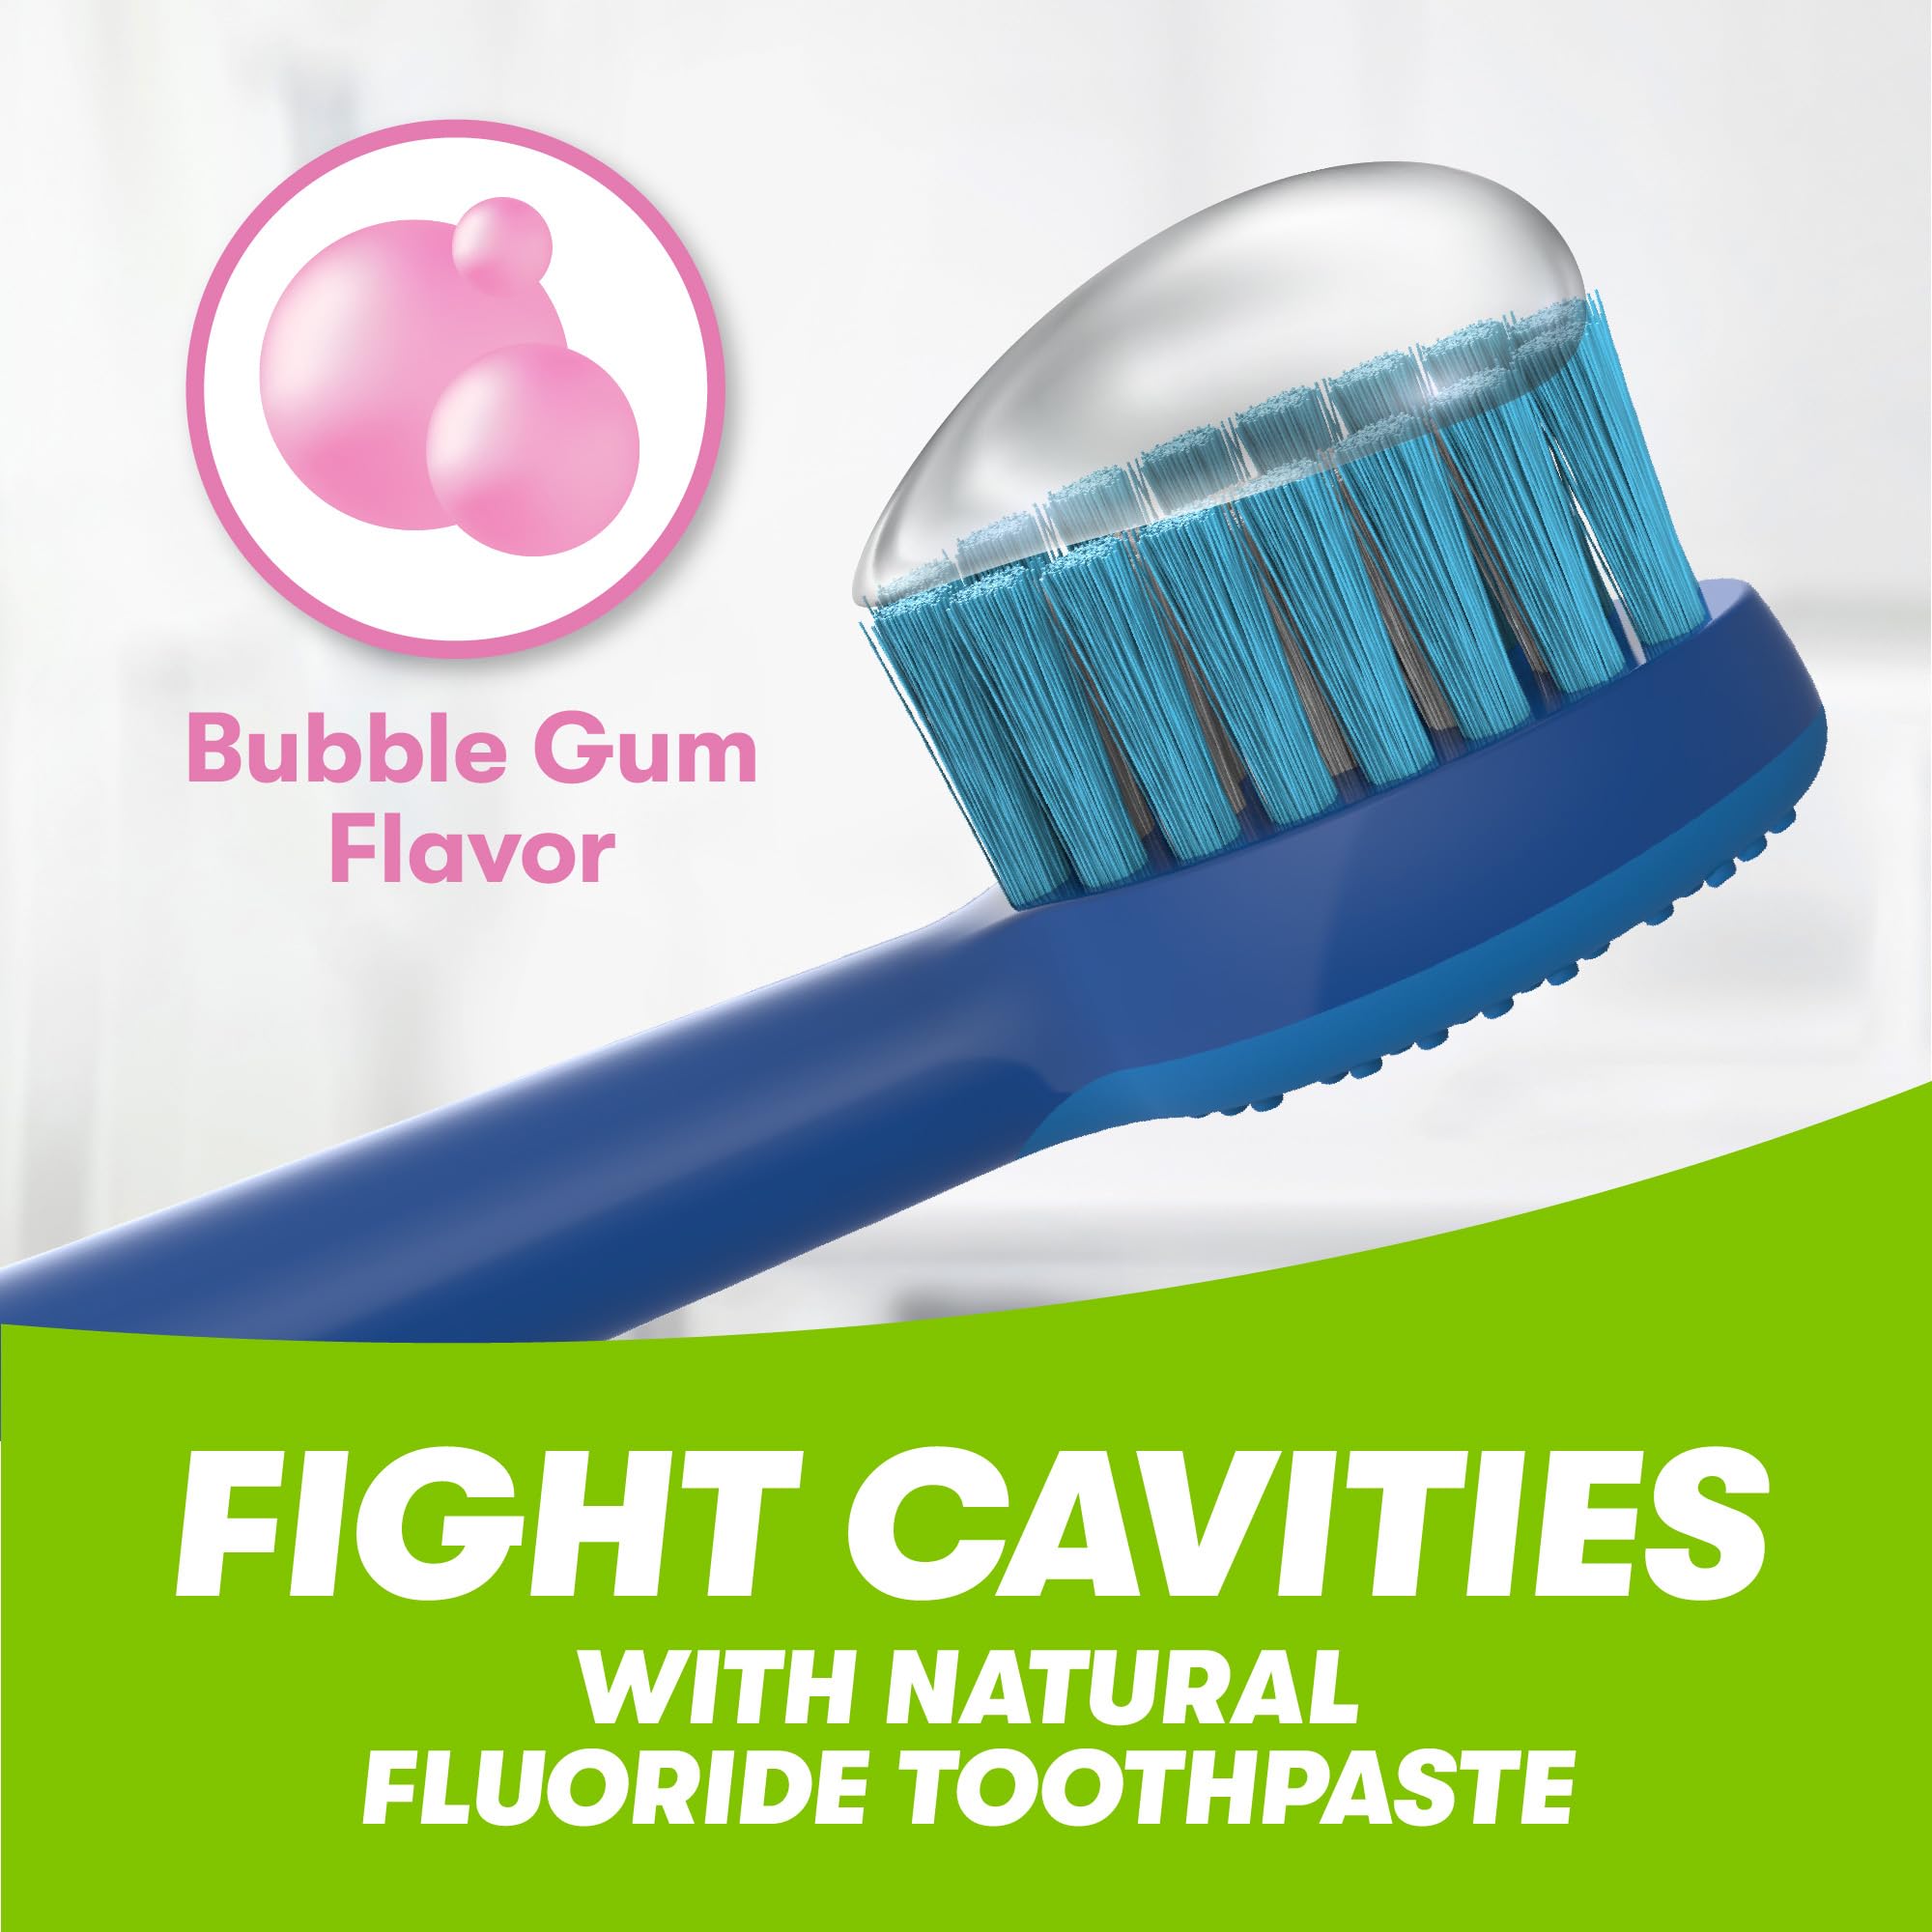 Firefly Kids Anti-Cavity Natural Fluoride Toothpaste, Sonic The Hedgehog, Bubble Gum Flavor, ADA Accepted, 4.2 OZ